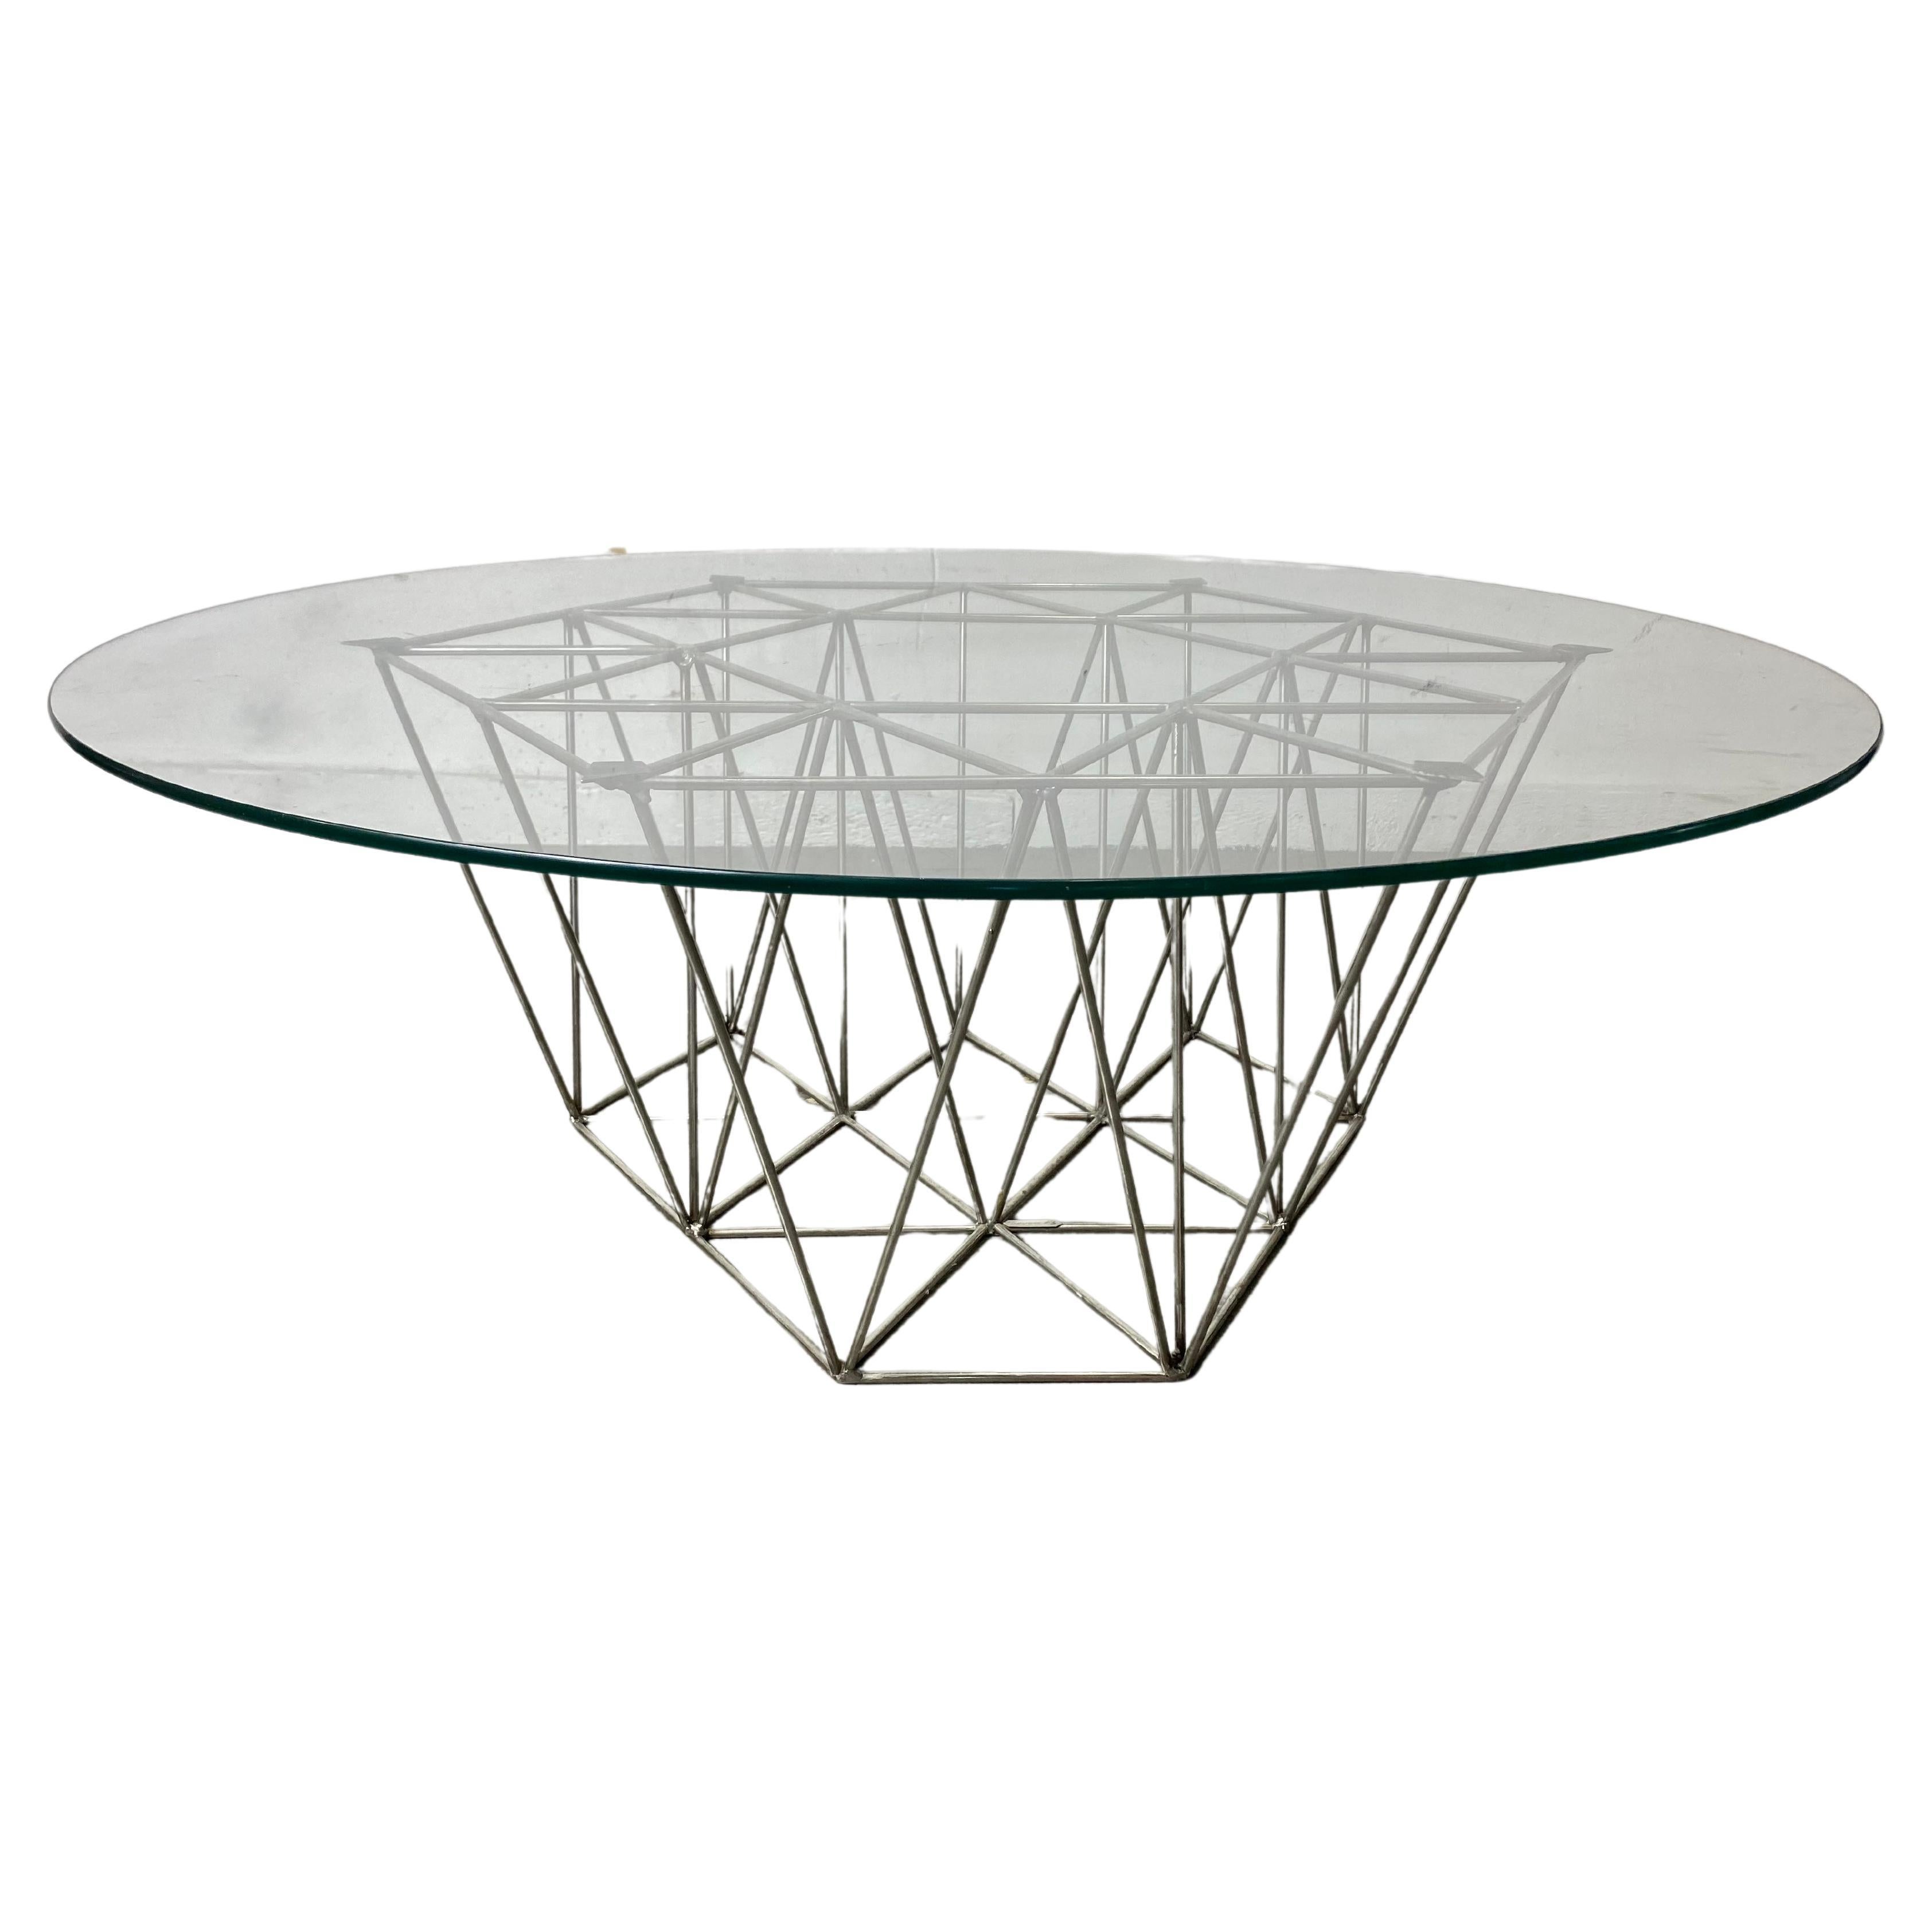 Coffee / Cocktail Table, Geometric Welded Steel & Glass Sculpture by Tresfort For Sale